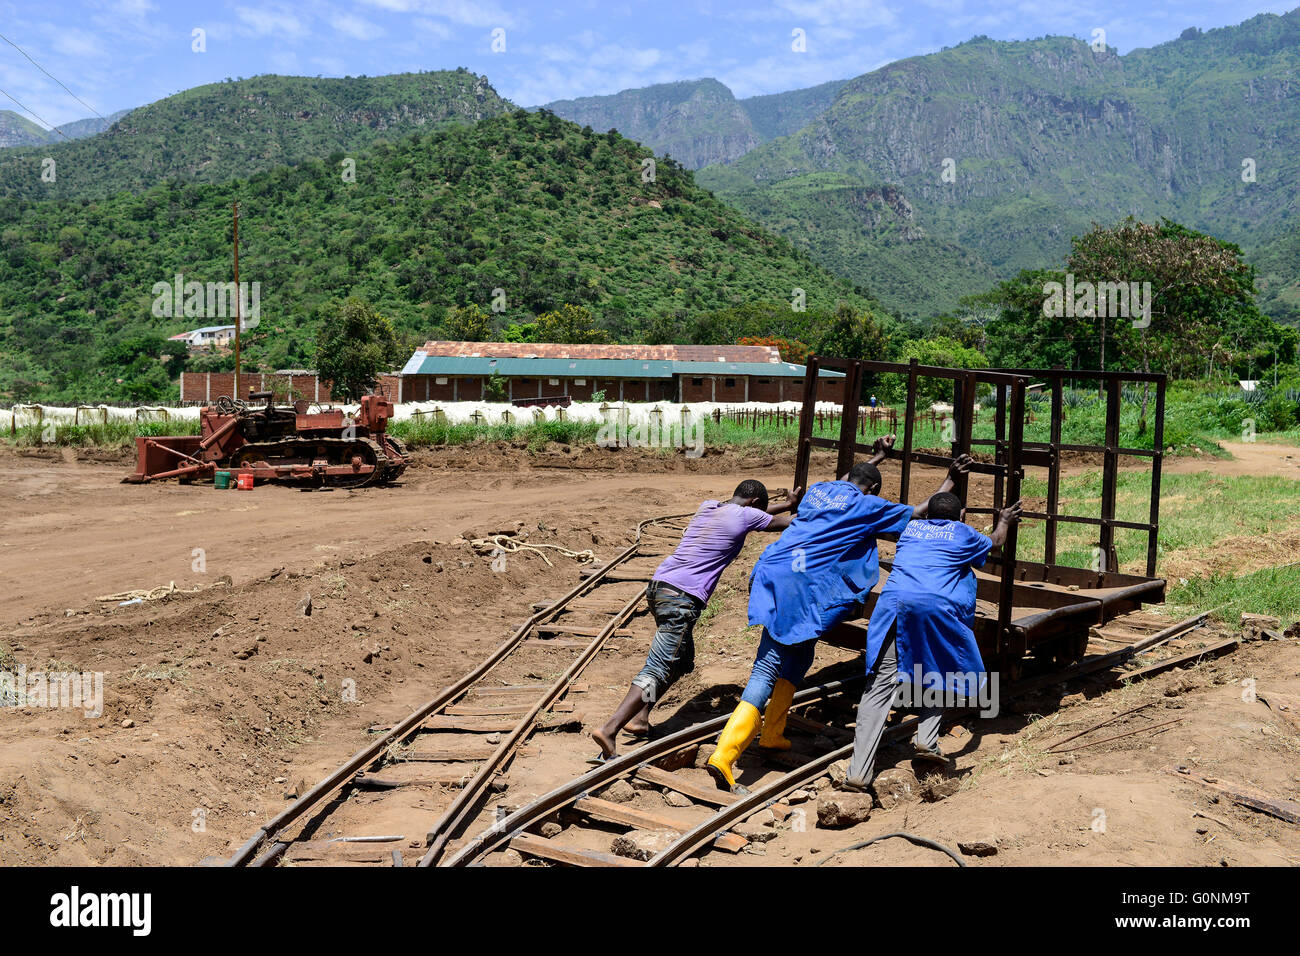 TANZANIA Tanga, Usambara Mountains, Sisal farming and industry, D.D. Ruhinda & Company Ltd., Mkumbara Sisal estate , old railway track from the colonial time, the estates where connected with the Usambara railway line to transport the sisal to Tanga port Stock Photo